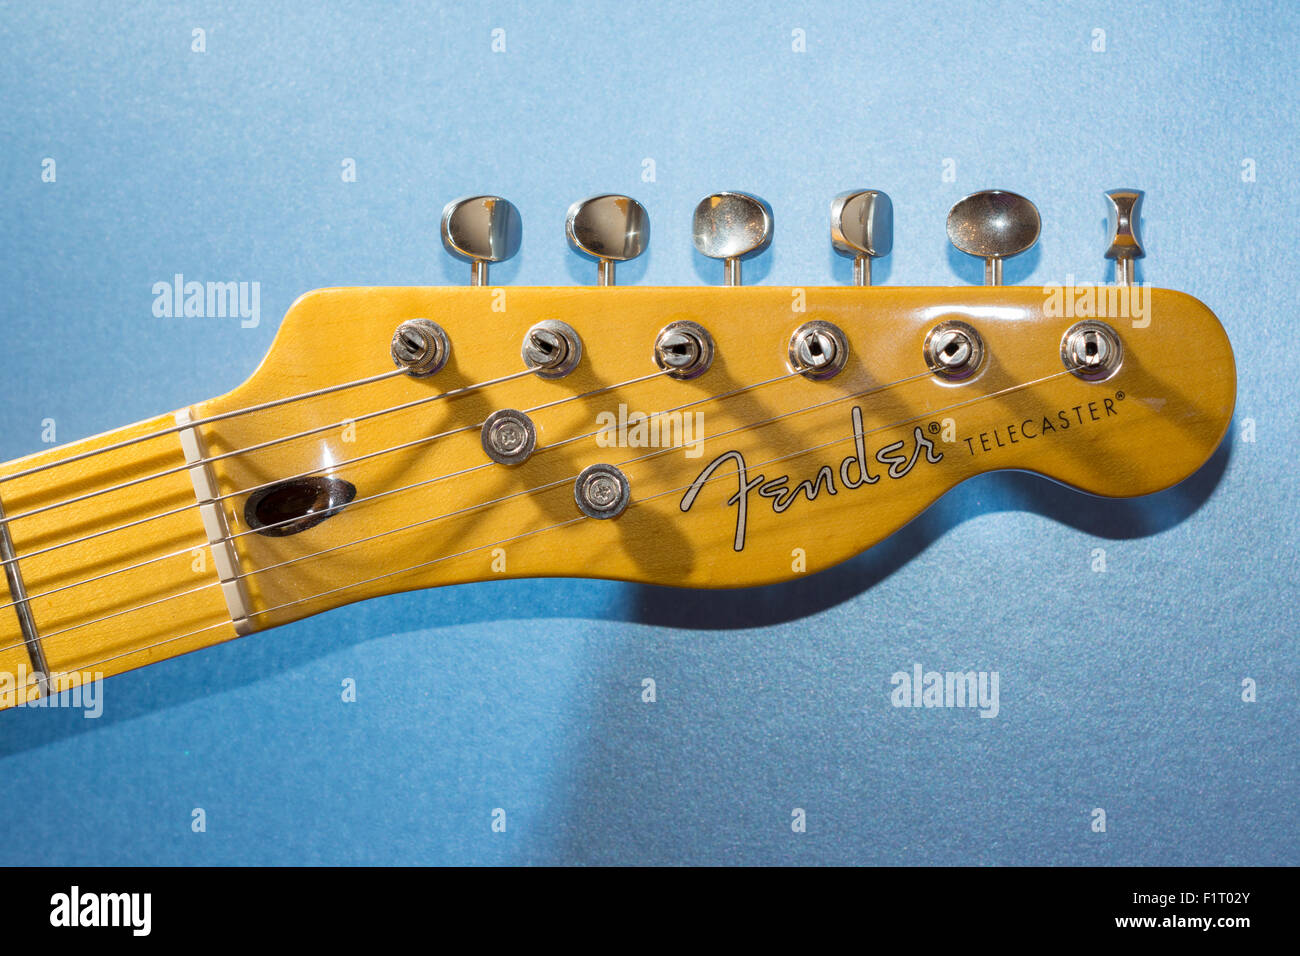 A view on the headstock of a Fender guitar, Modern Player Telecaster Plus Stock Photo